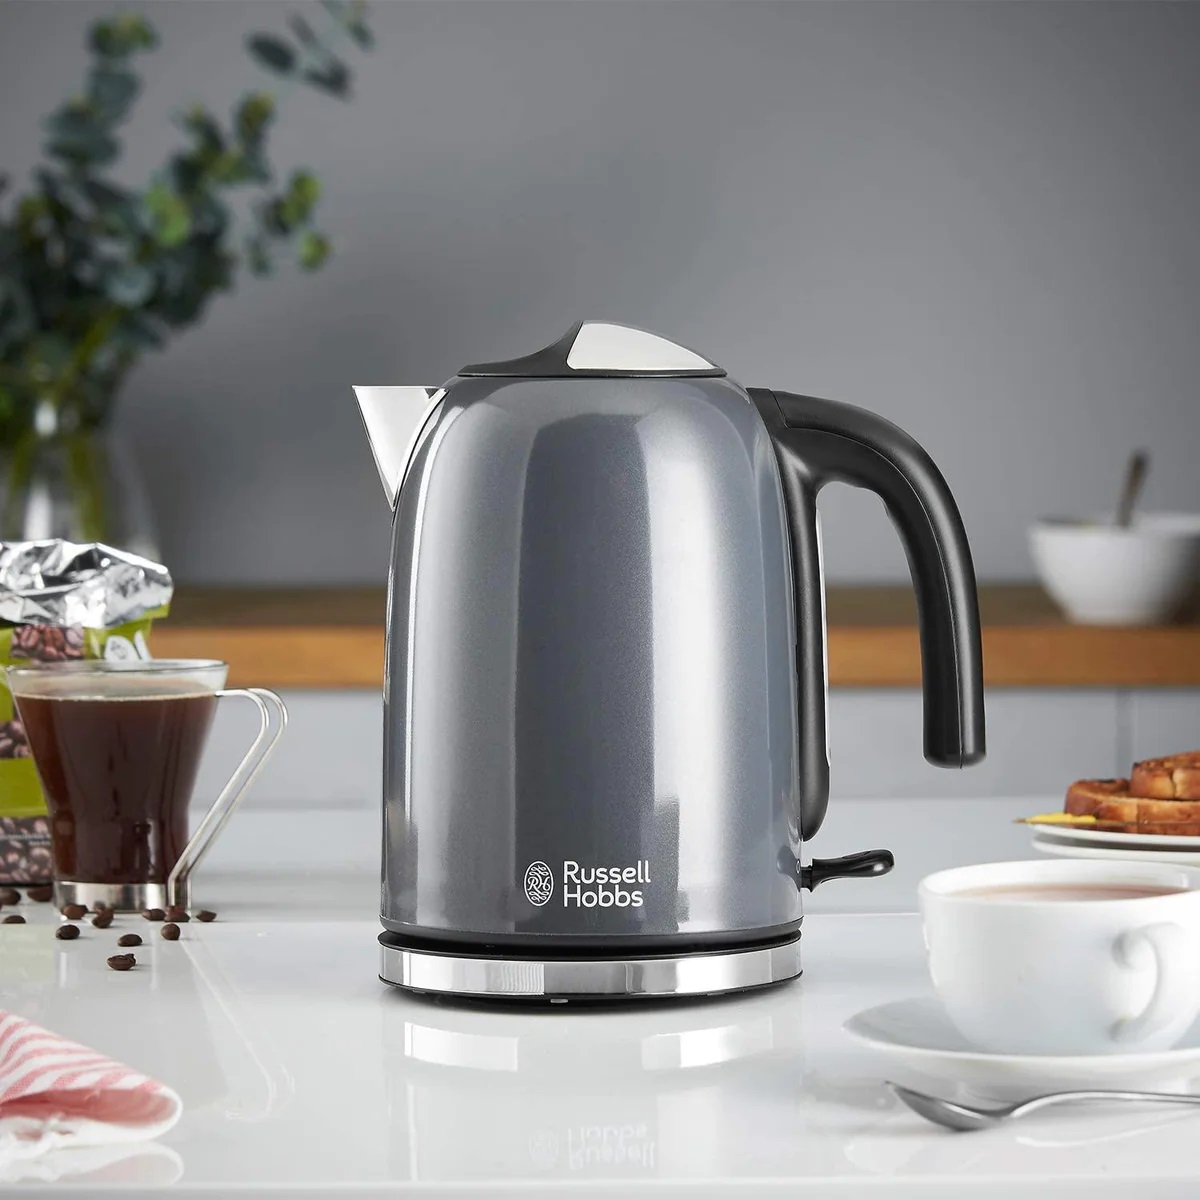 Boil water to the exact degree with the 1200 watt Chef'sChoice Gooseneck Electric  Kettle with digital temperature controls. Keep warm feature maintains water  temperature. Easy-access top opening for easy filling. Comfortable handle.